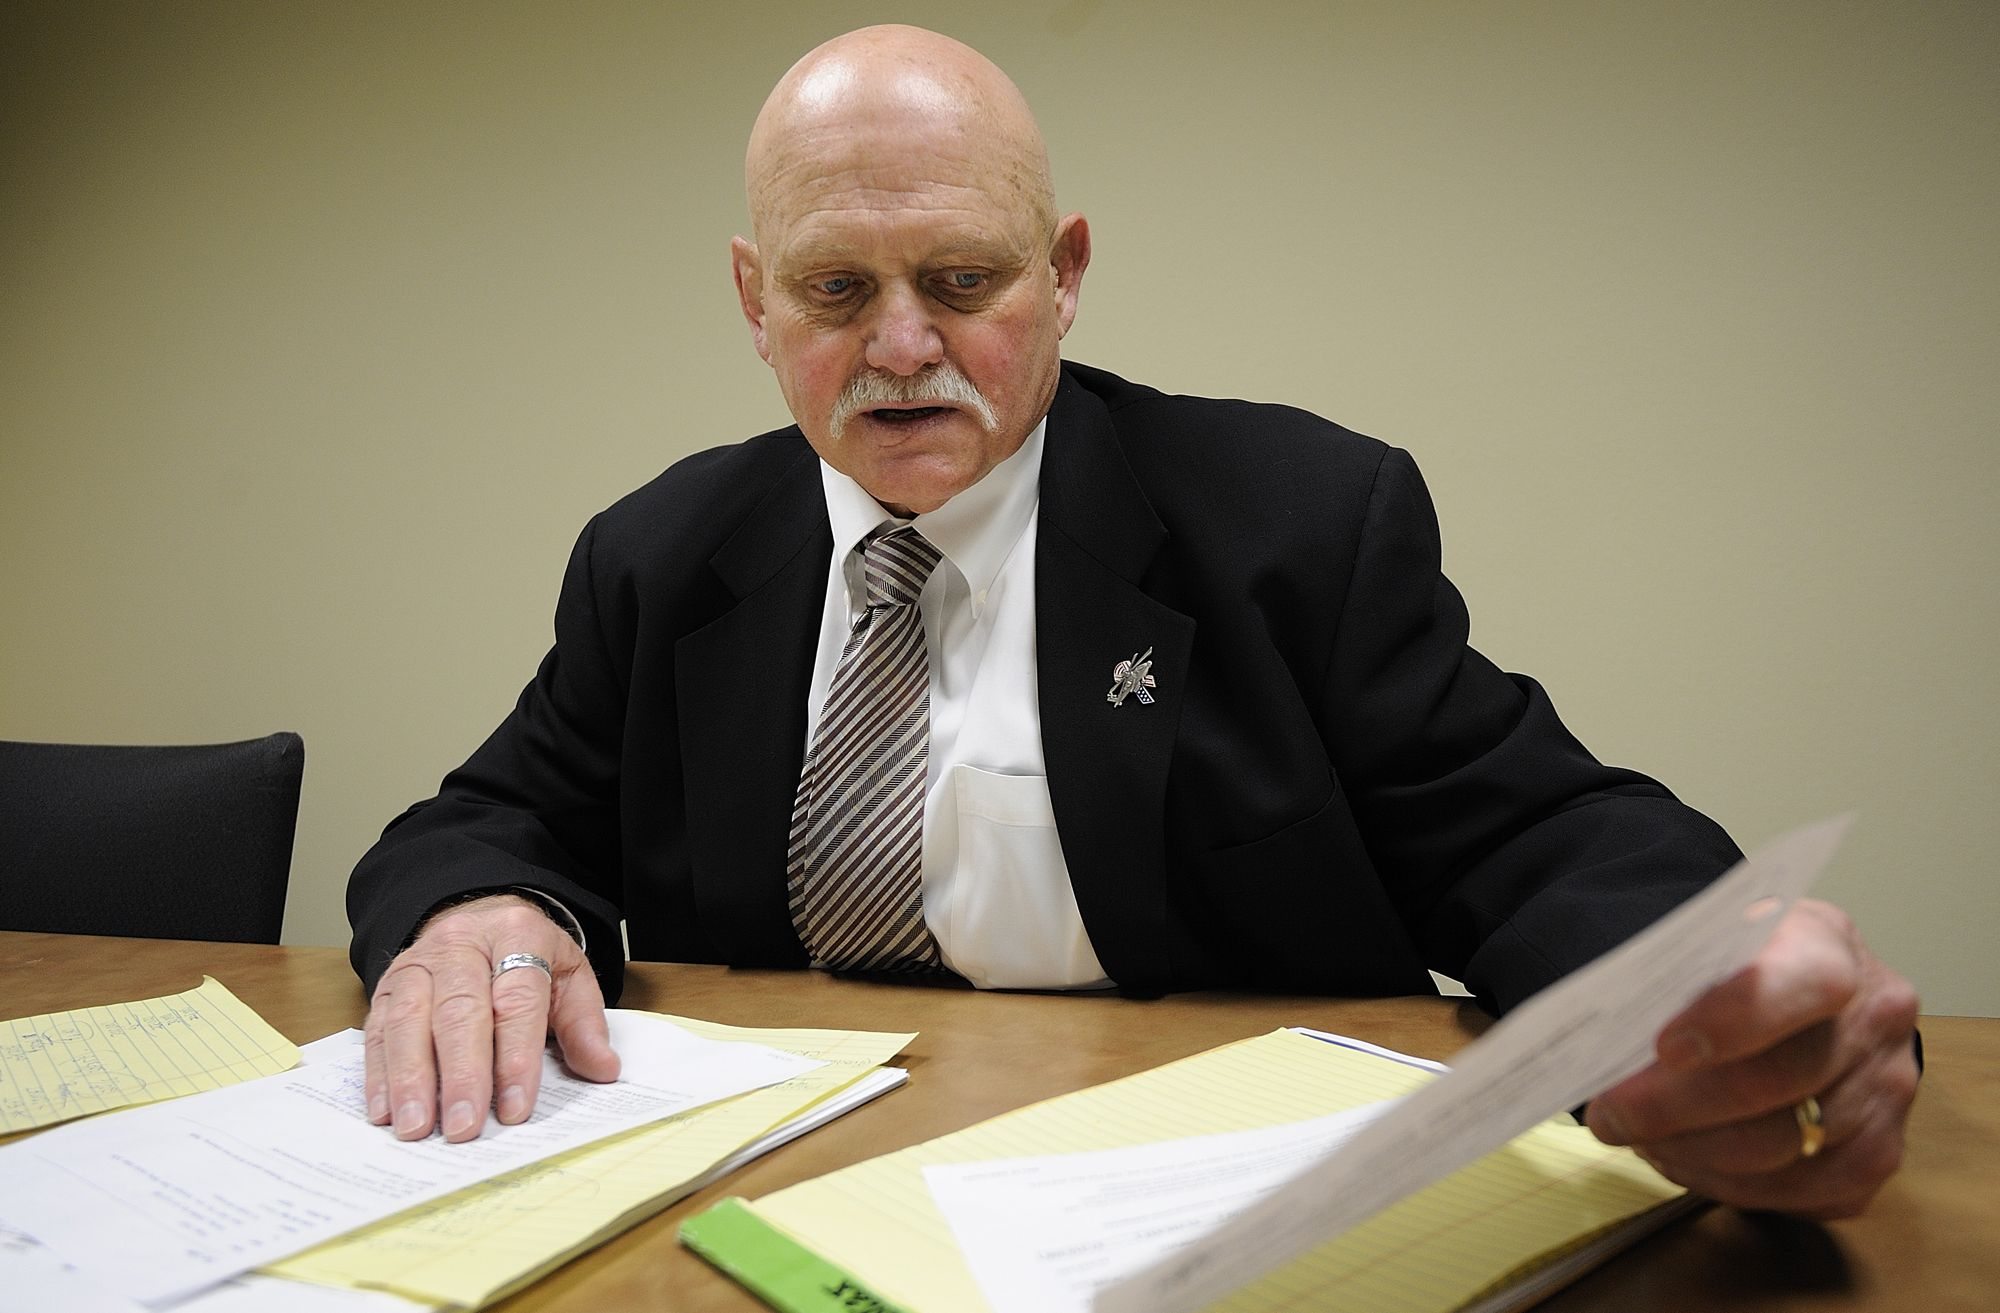 Co-workers said they envied the ability of Cleve Thompson, who retired last week as Clark County's drug and alcohol program manager, to grasp the intricacies of funding and regulations as he won grants to pay for treatment for low-income and indigent people.